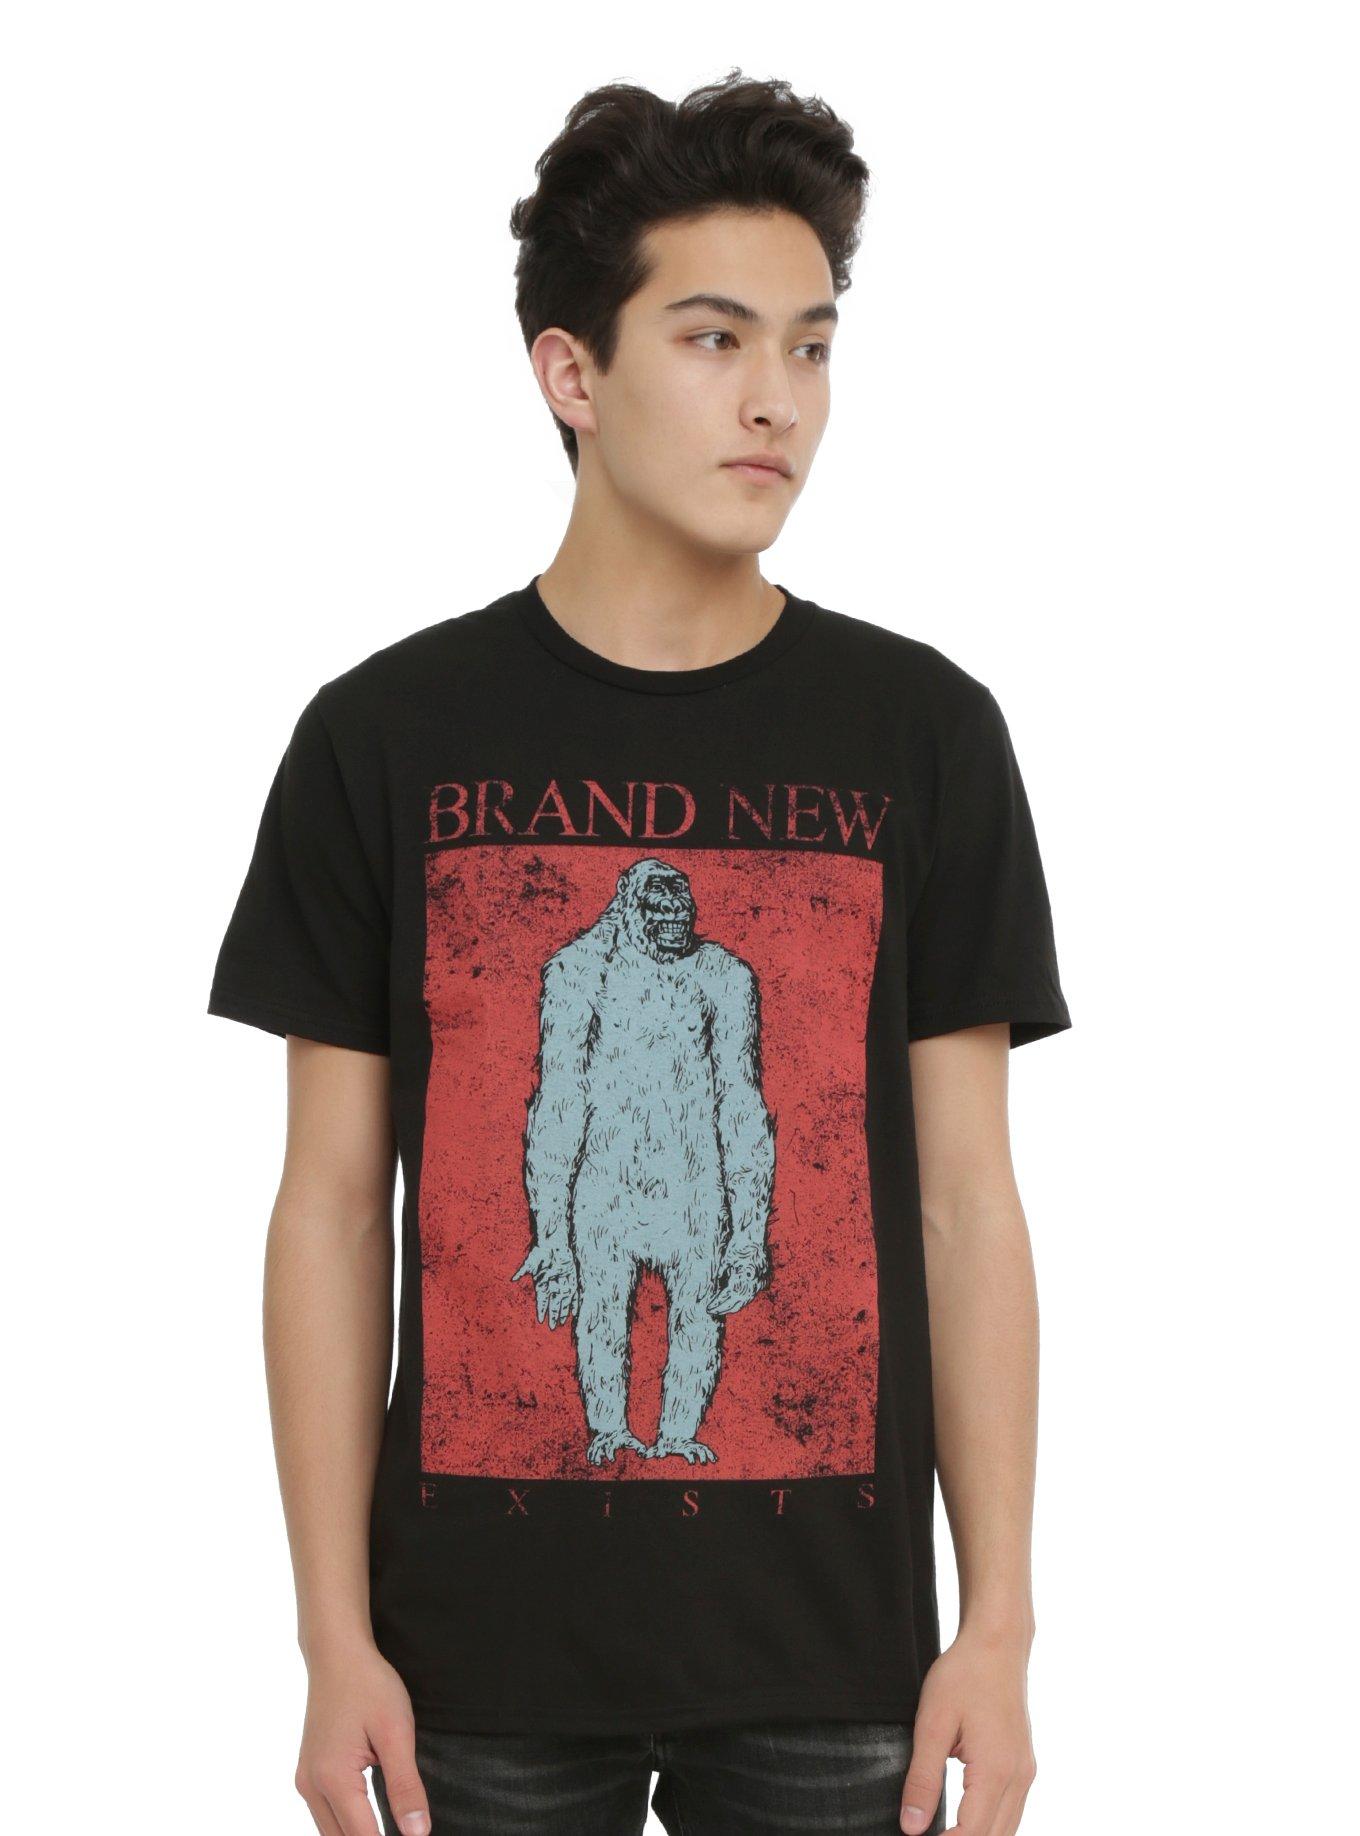 Brand New Exists T-Shirt